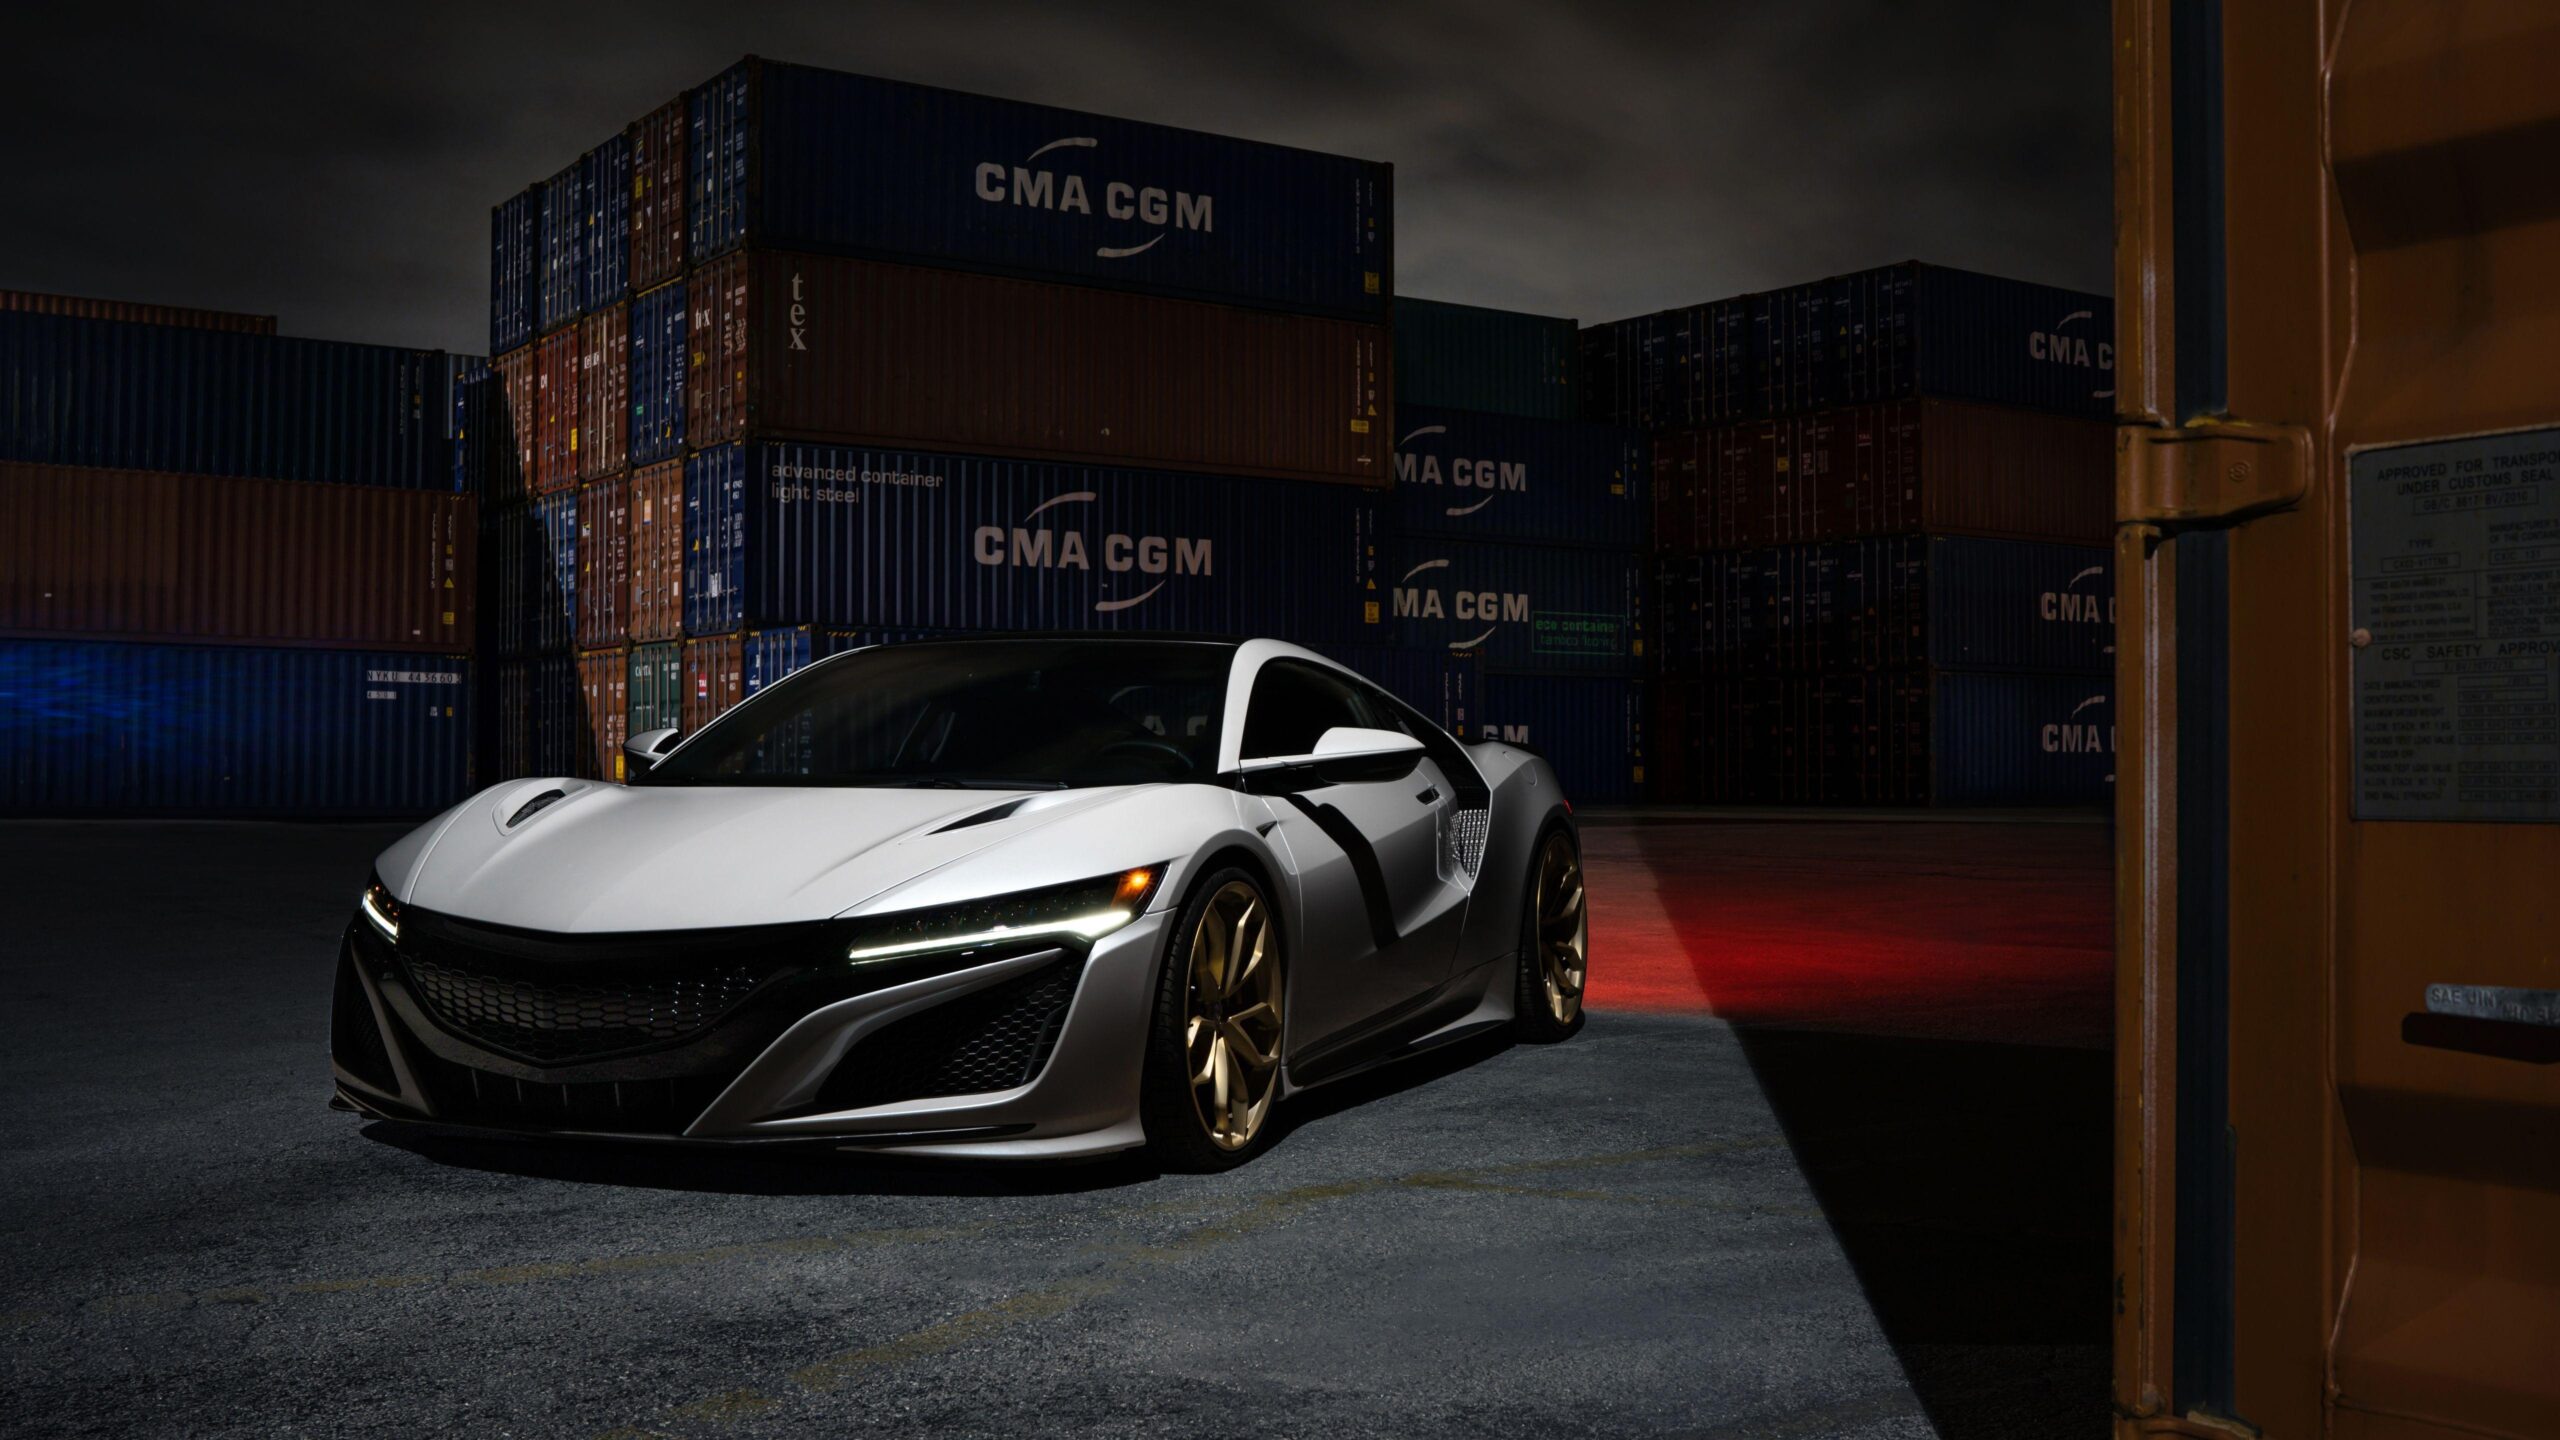 2017 Acura NSX Wallpaper Hd For Pc 4k